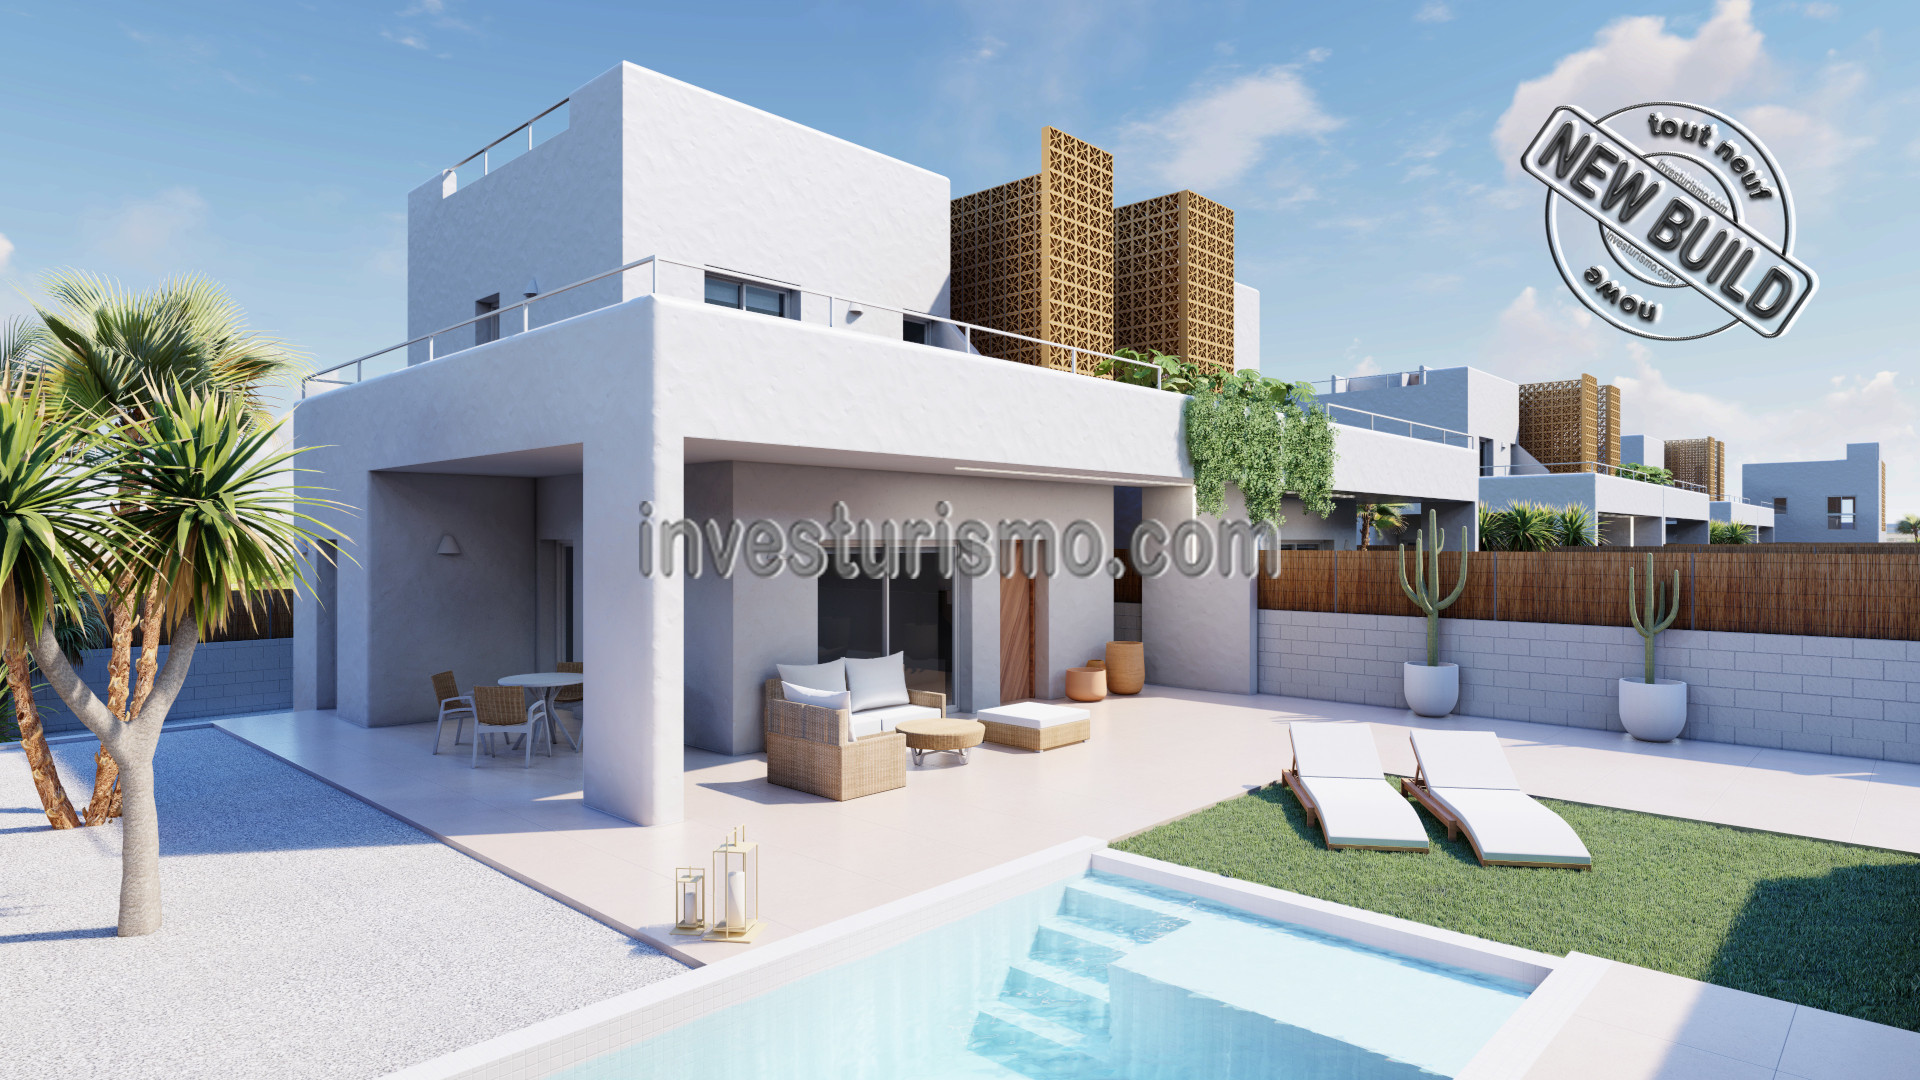 Villas 3 bedrooms, 3 bathrooms , a large open plan living room with kitchen all distributed on two floors.